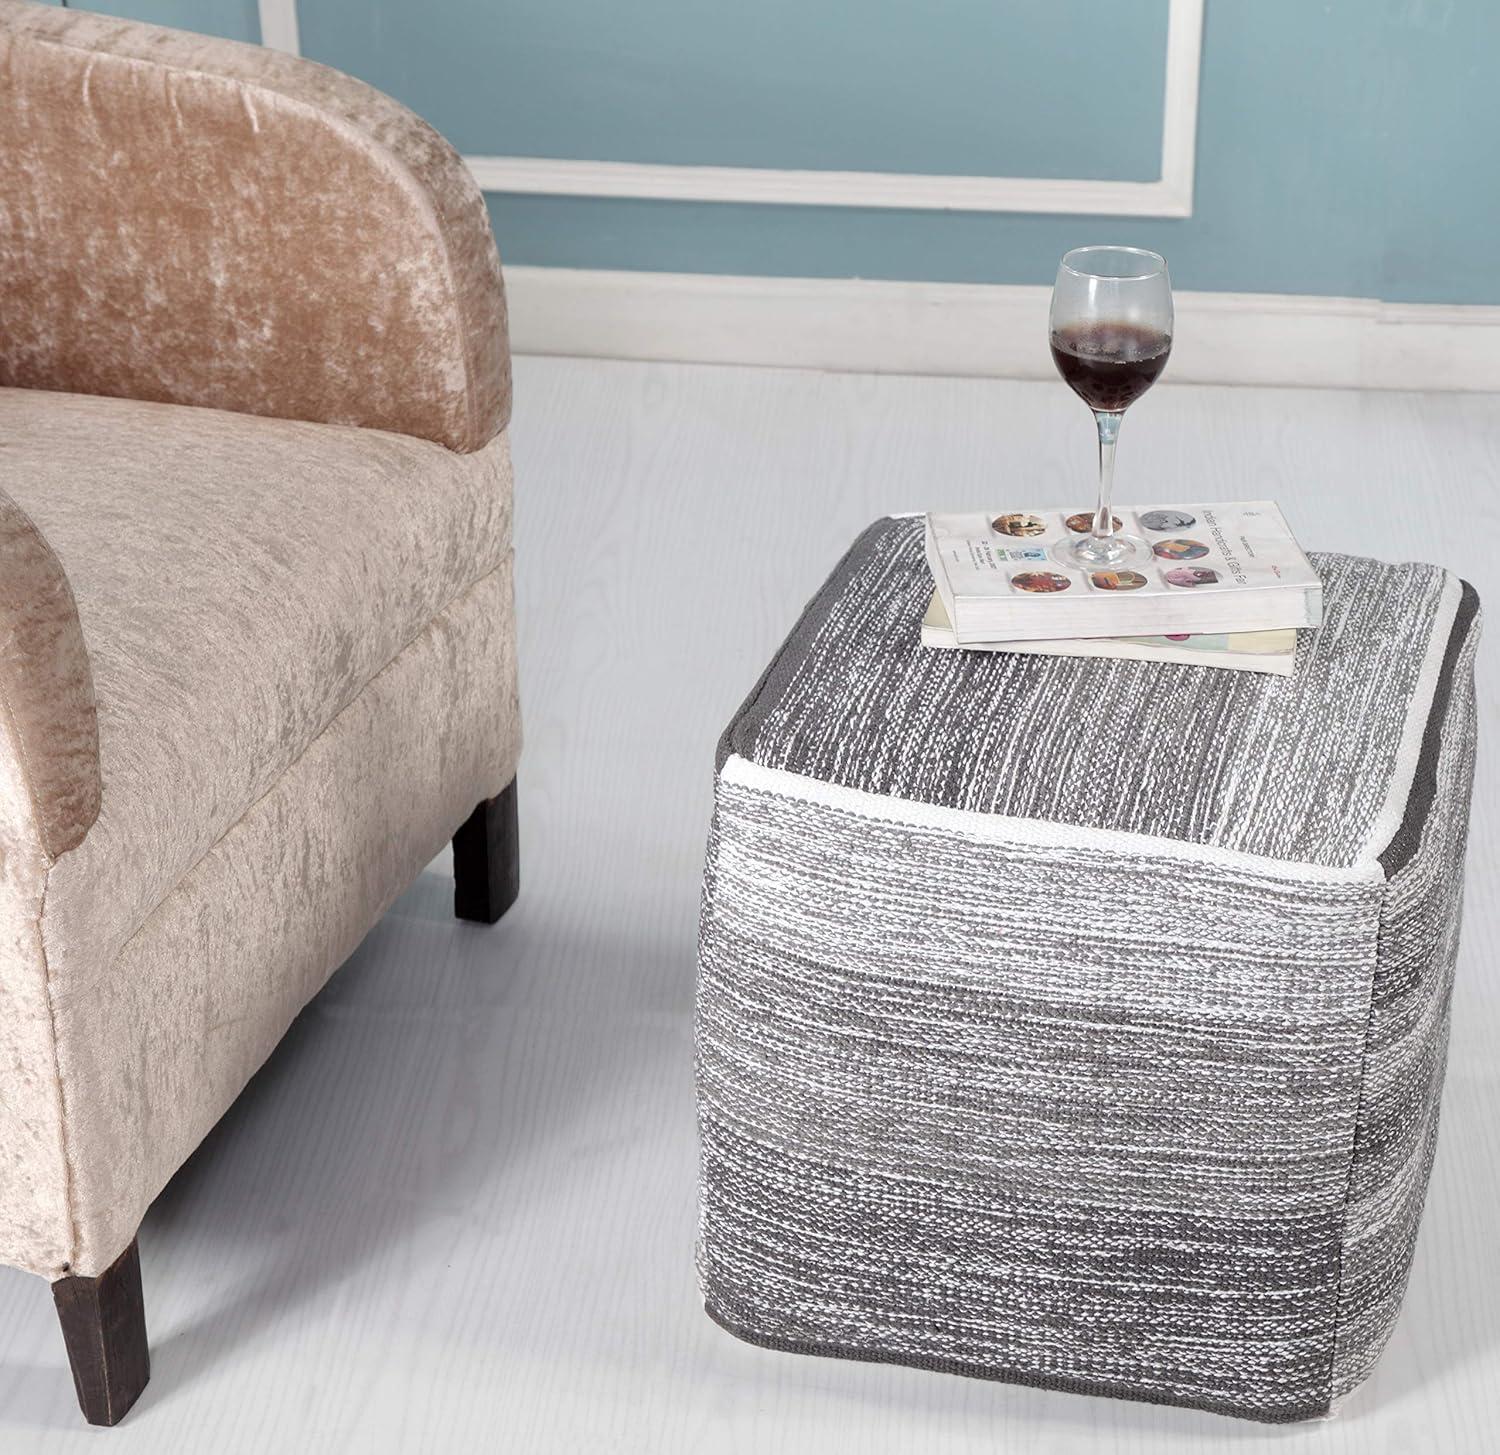 Grayscale Distressed Cube Pouf for Versatile Seating